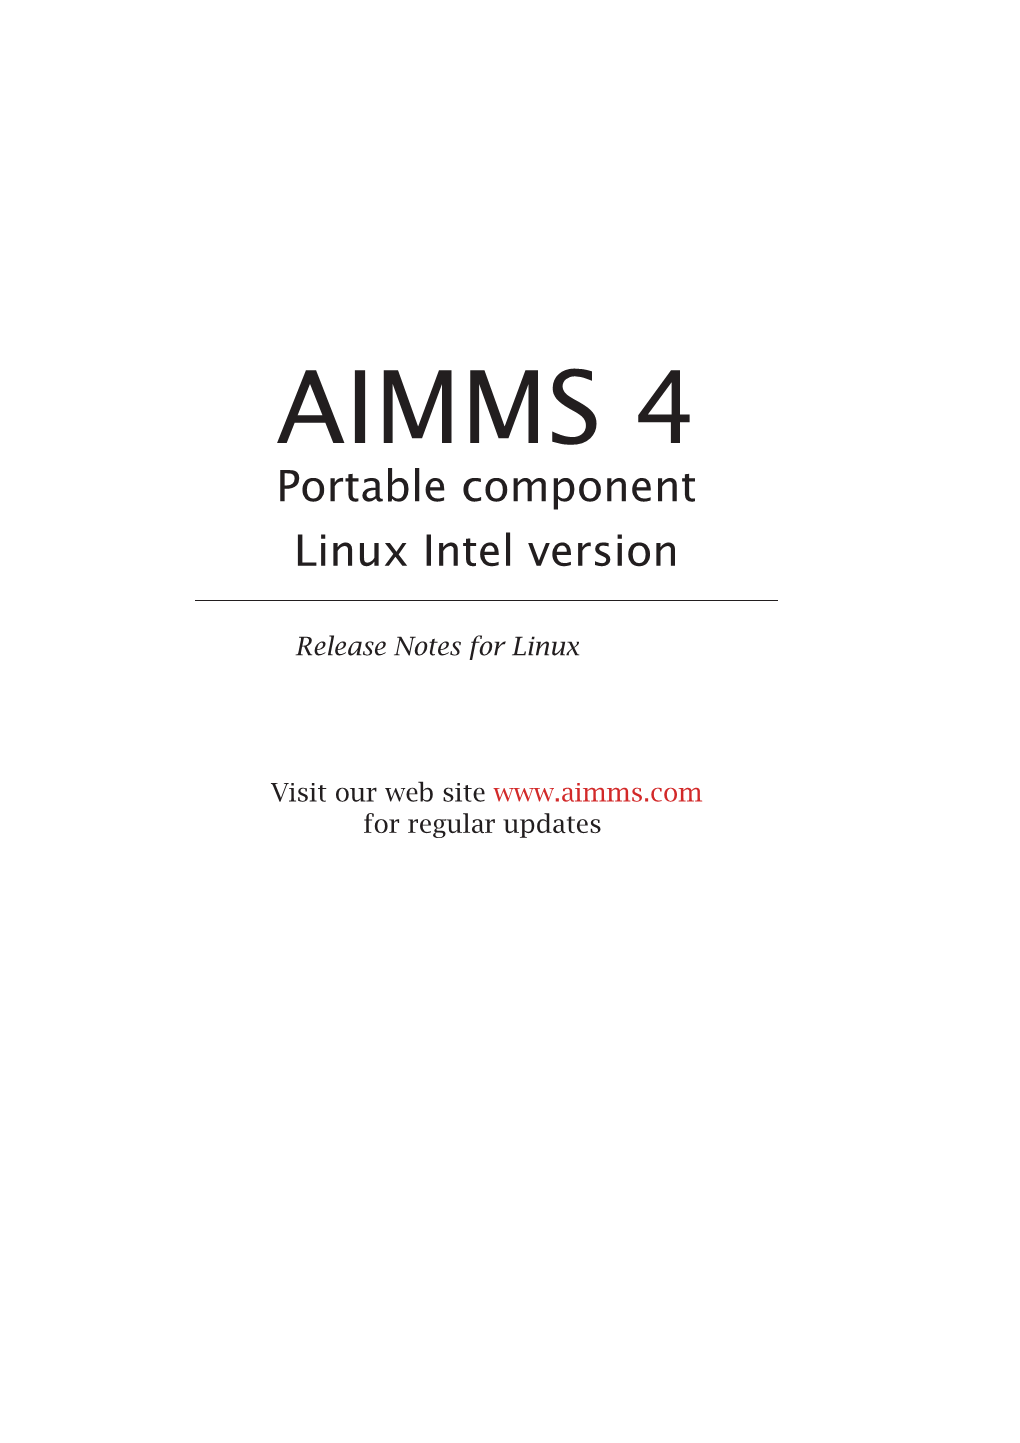 AIMMS 4 Linux Release Notes